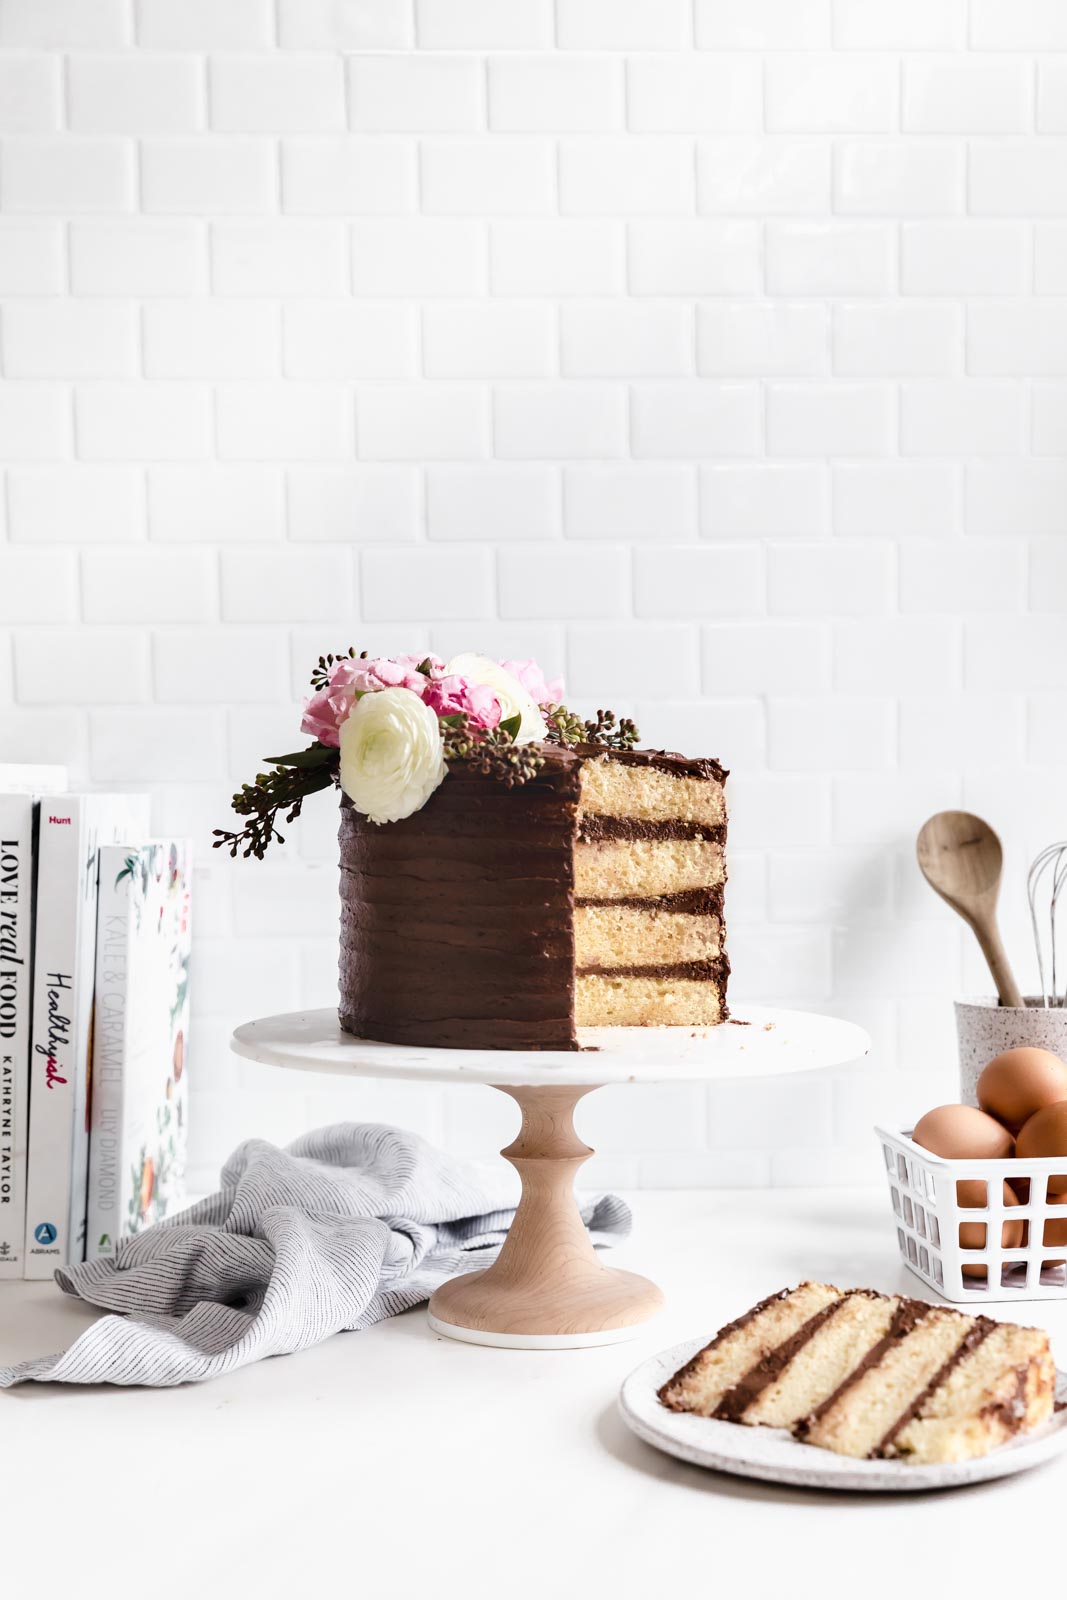 Make any day feel like a birthday with the best ever vanilla cake with chocolate frosting. This cake IS the celebration!